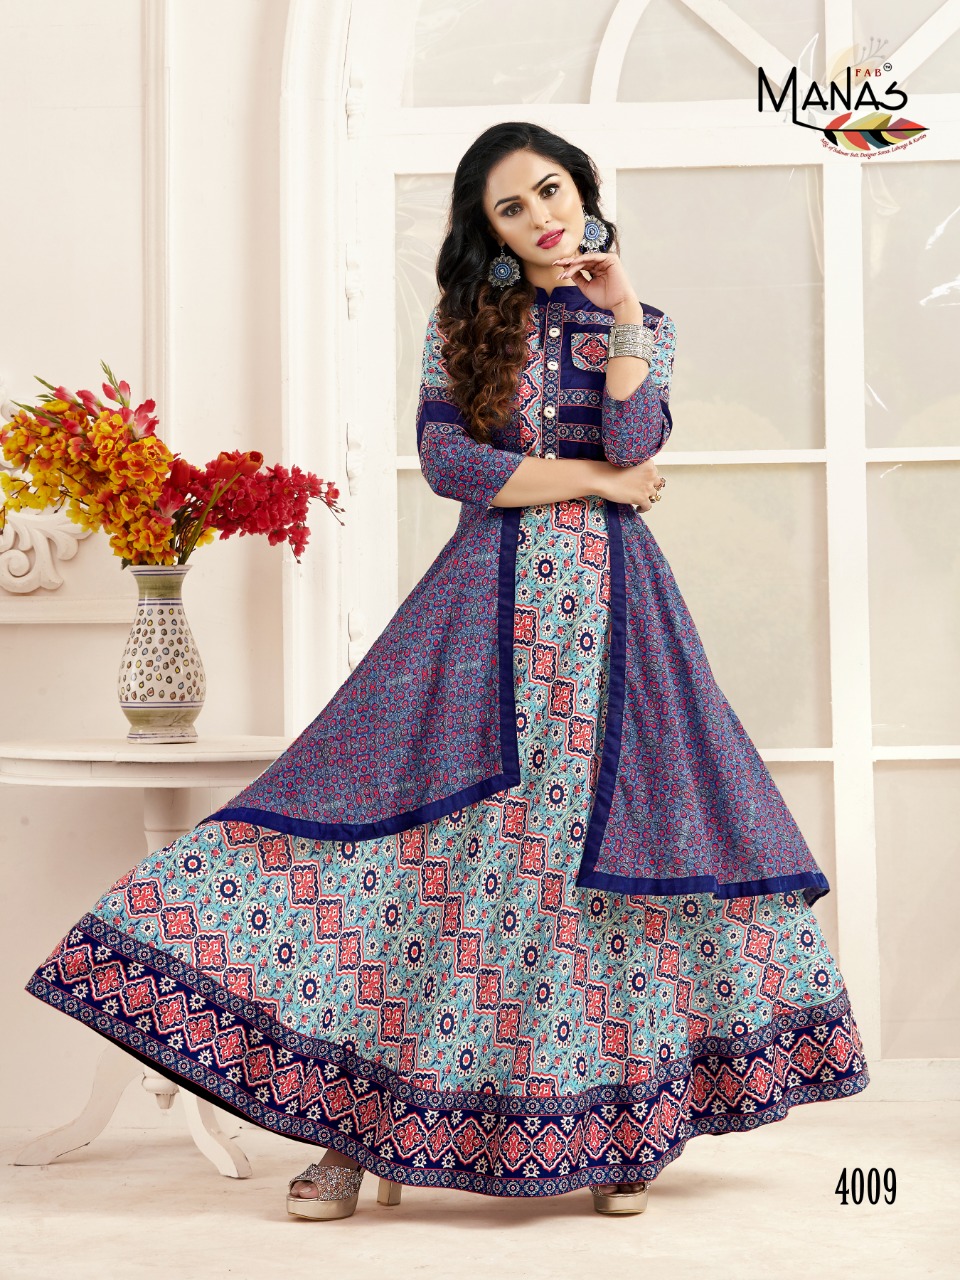 Manas Valentina vol 2 premium collection of colorful Indo Western gowns